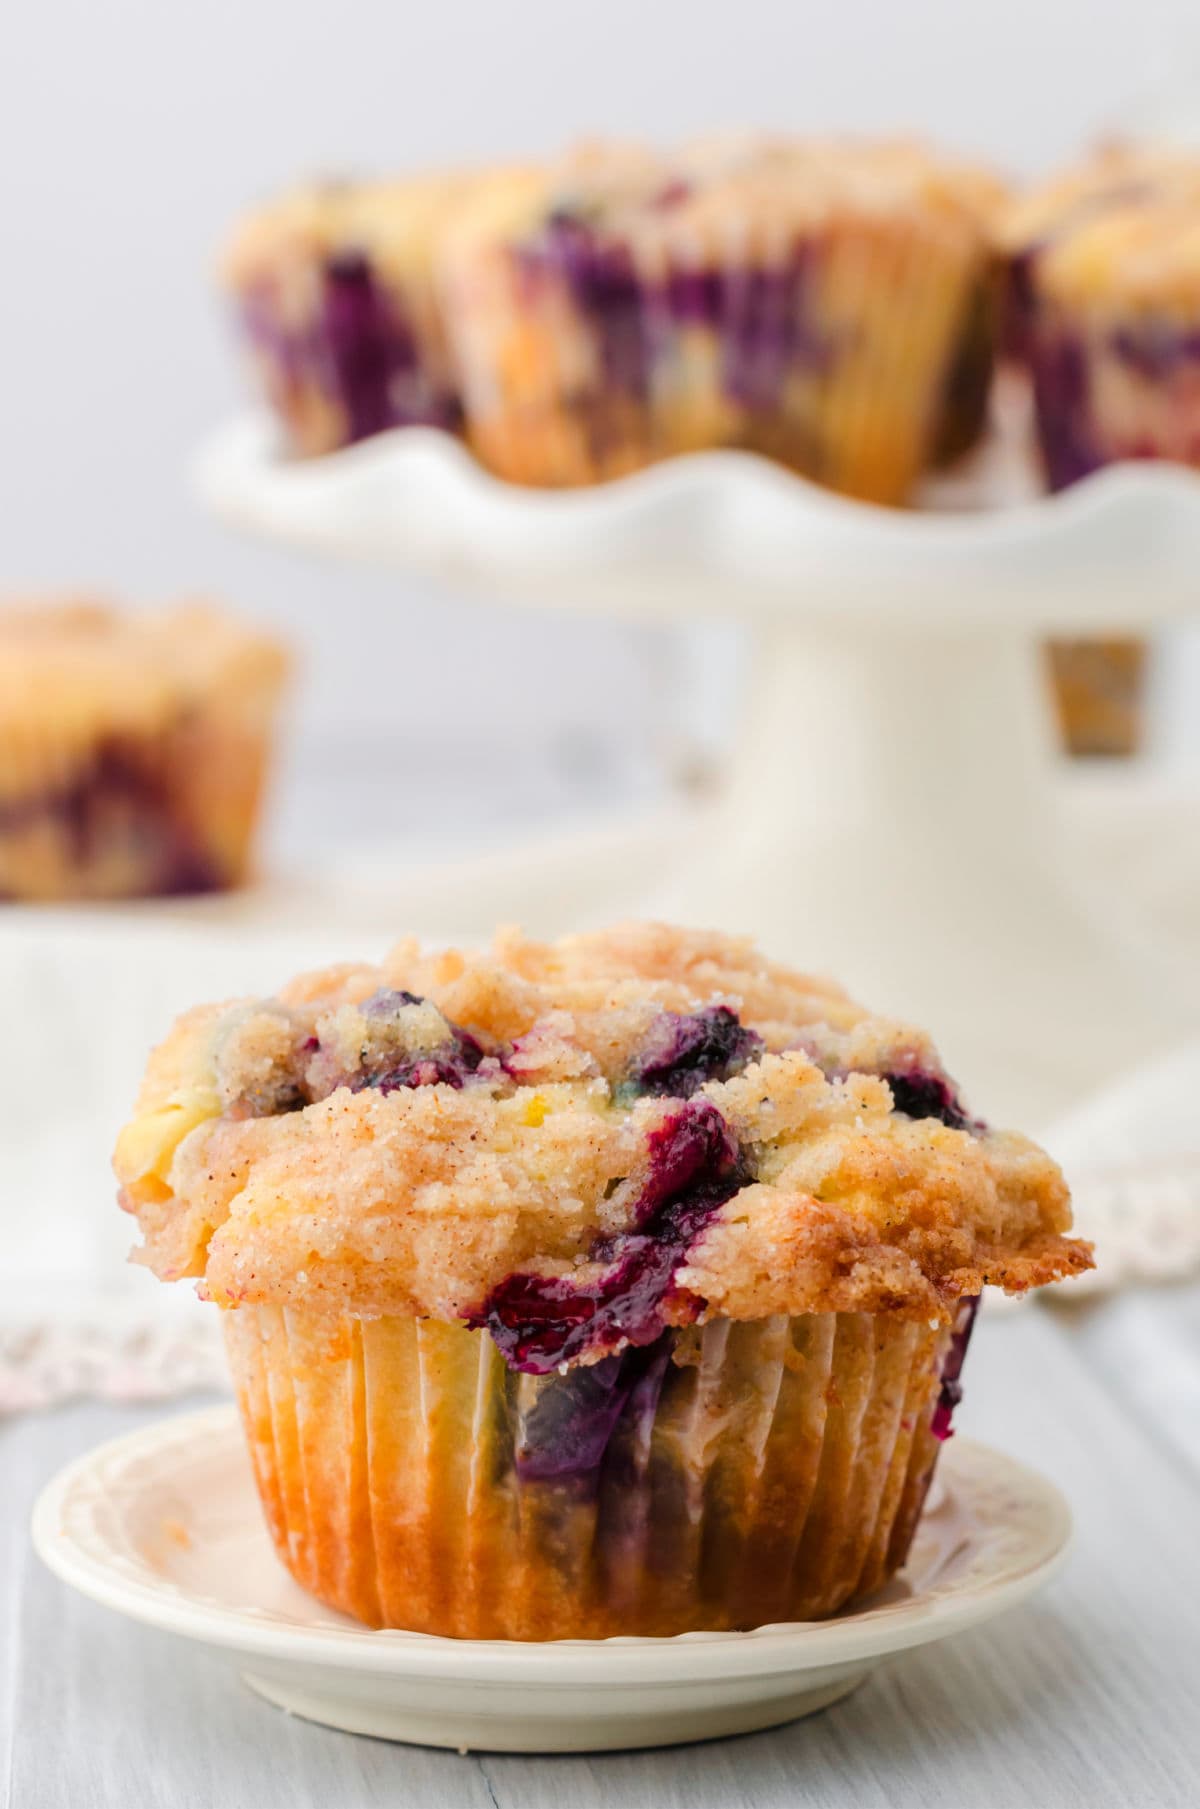 Decorative image. Closeup of a blueberry muffin on a plate.